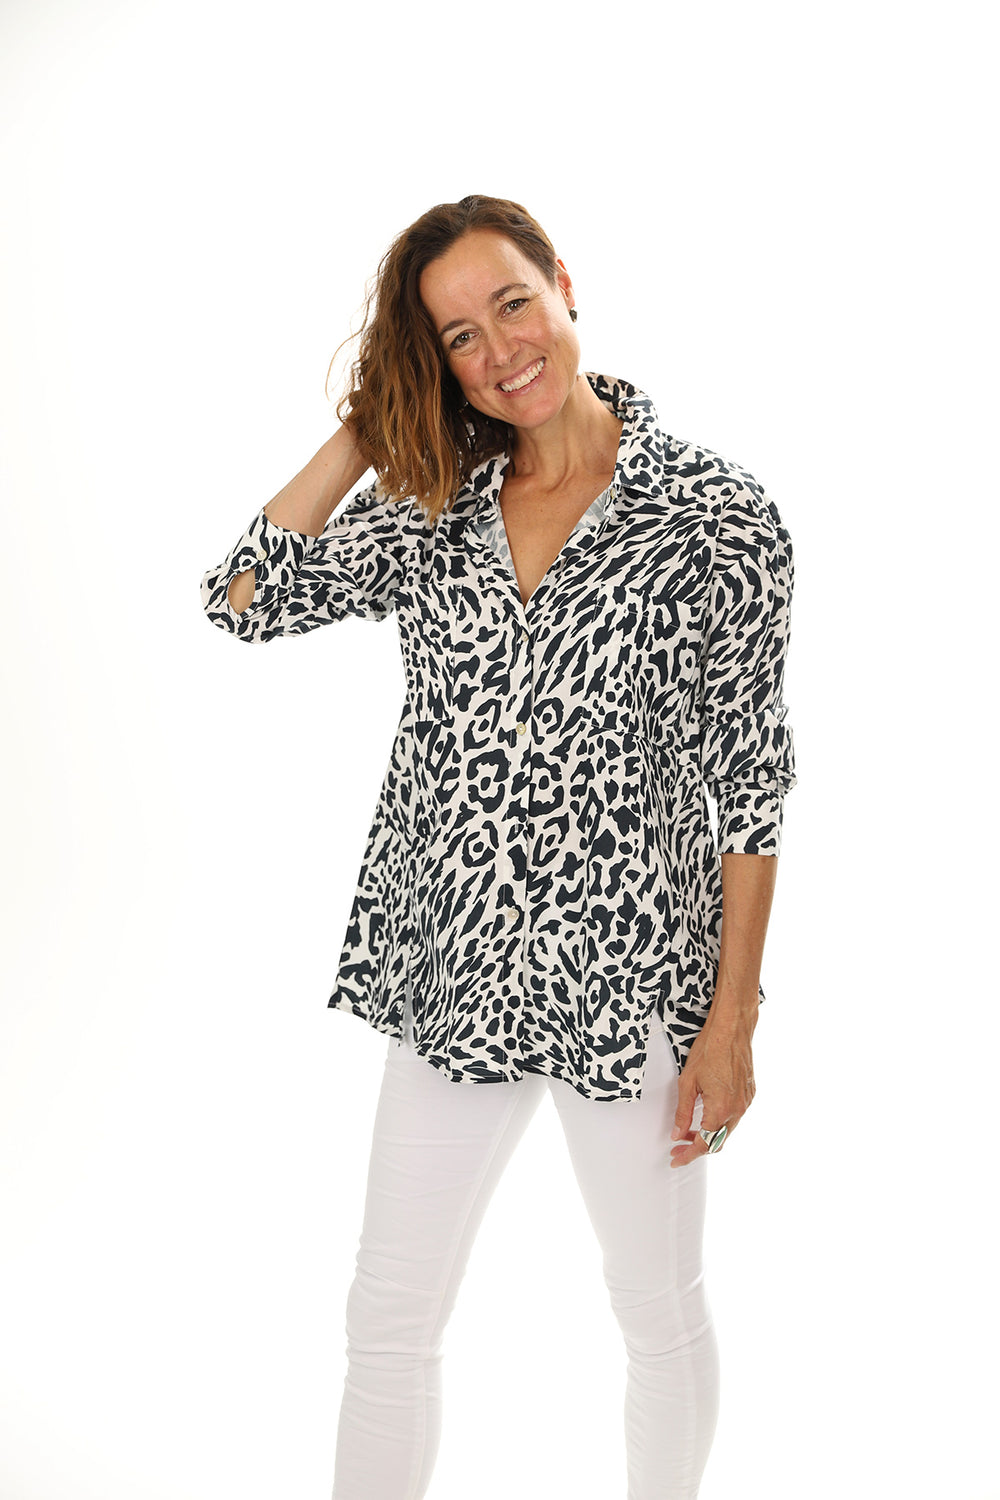 Woman wearing the animal cotton top by See Saw, sold and shipped from Pizazz Boutique Nelson Bay women's dresses online Australia